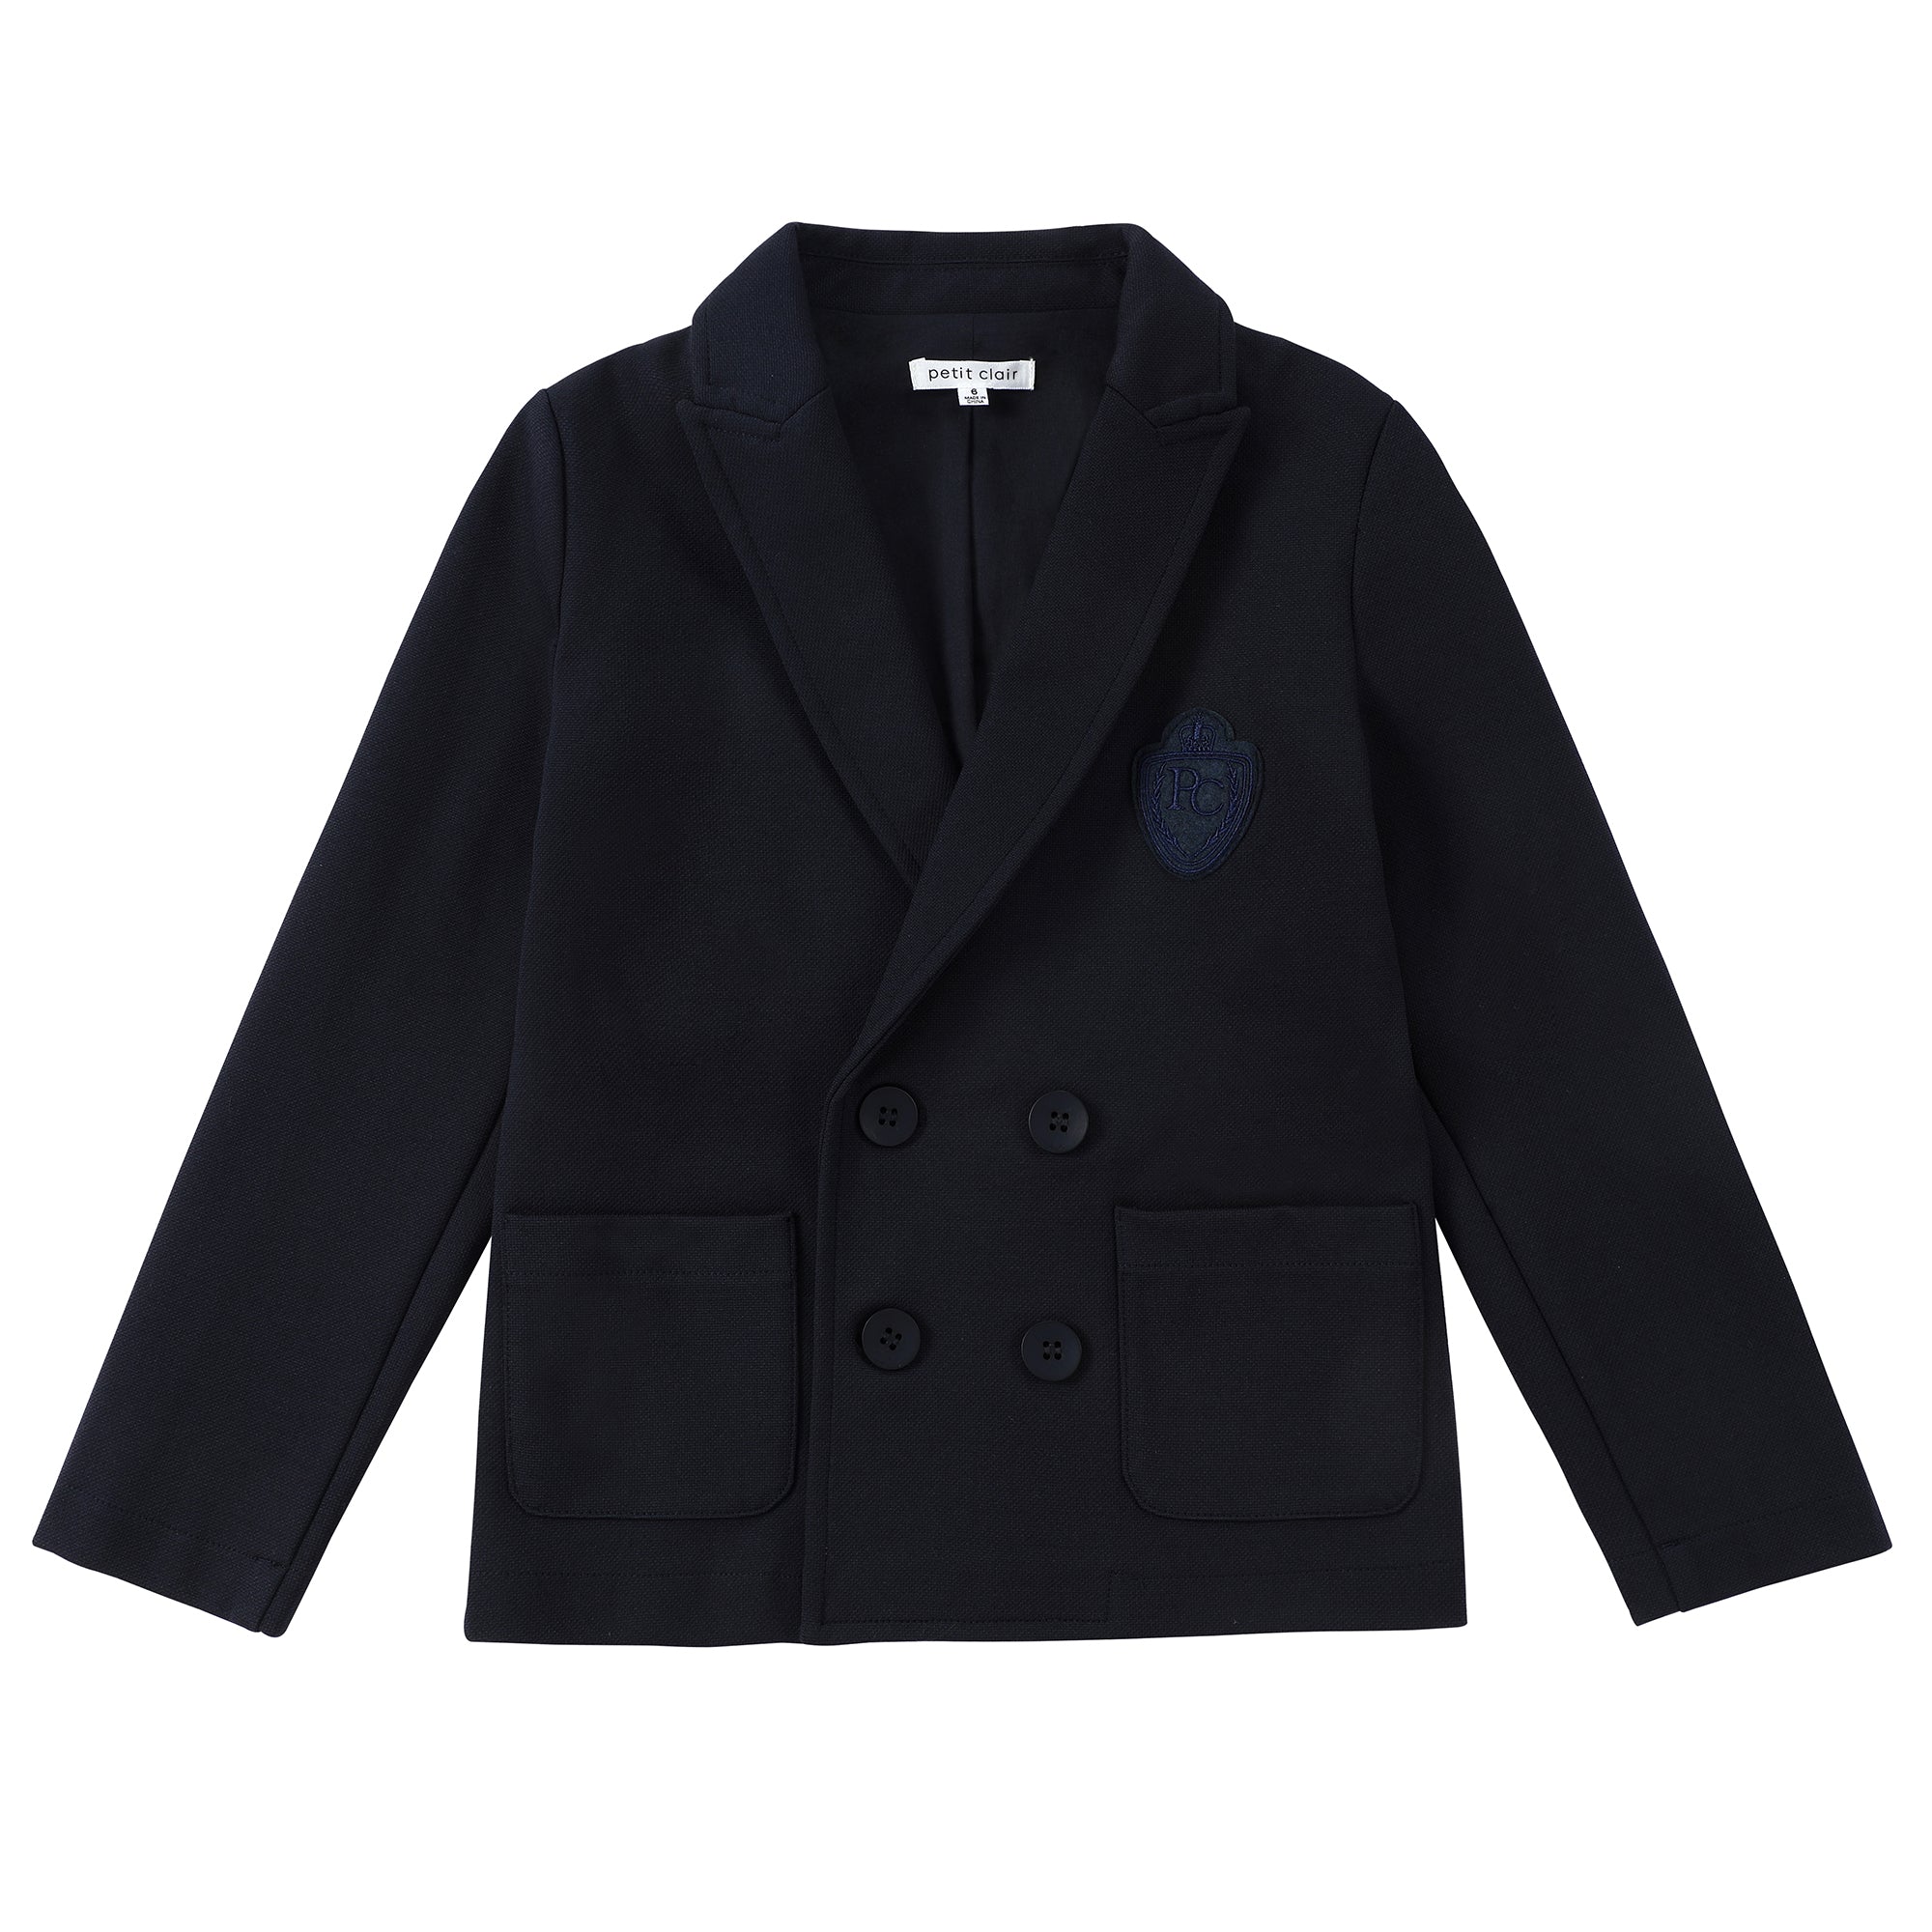 Navy Stretch Pique Double Breasted Blazer With Emblem – Petit Clair